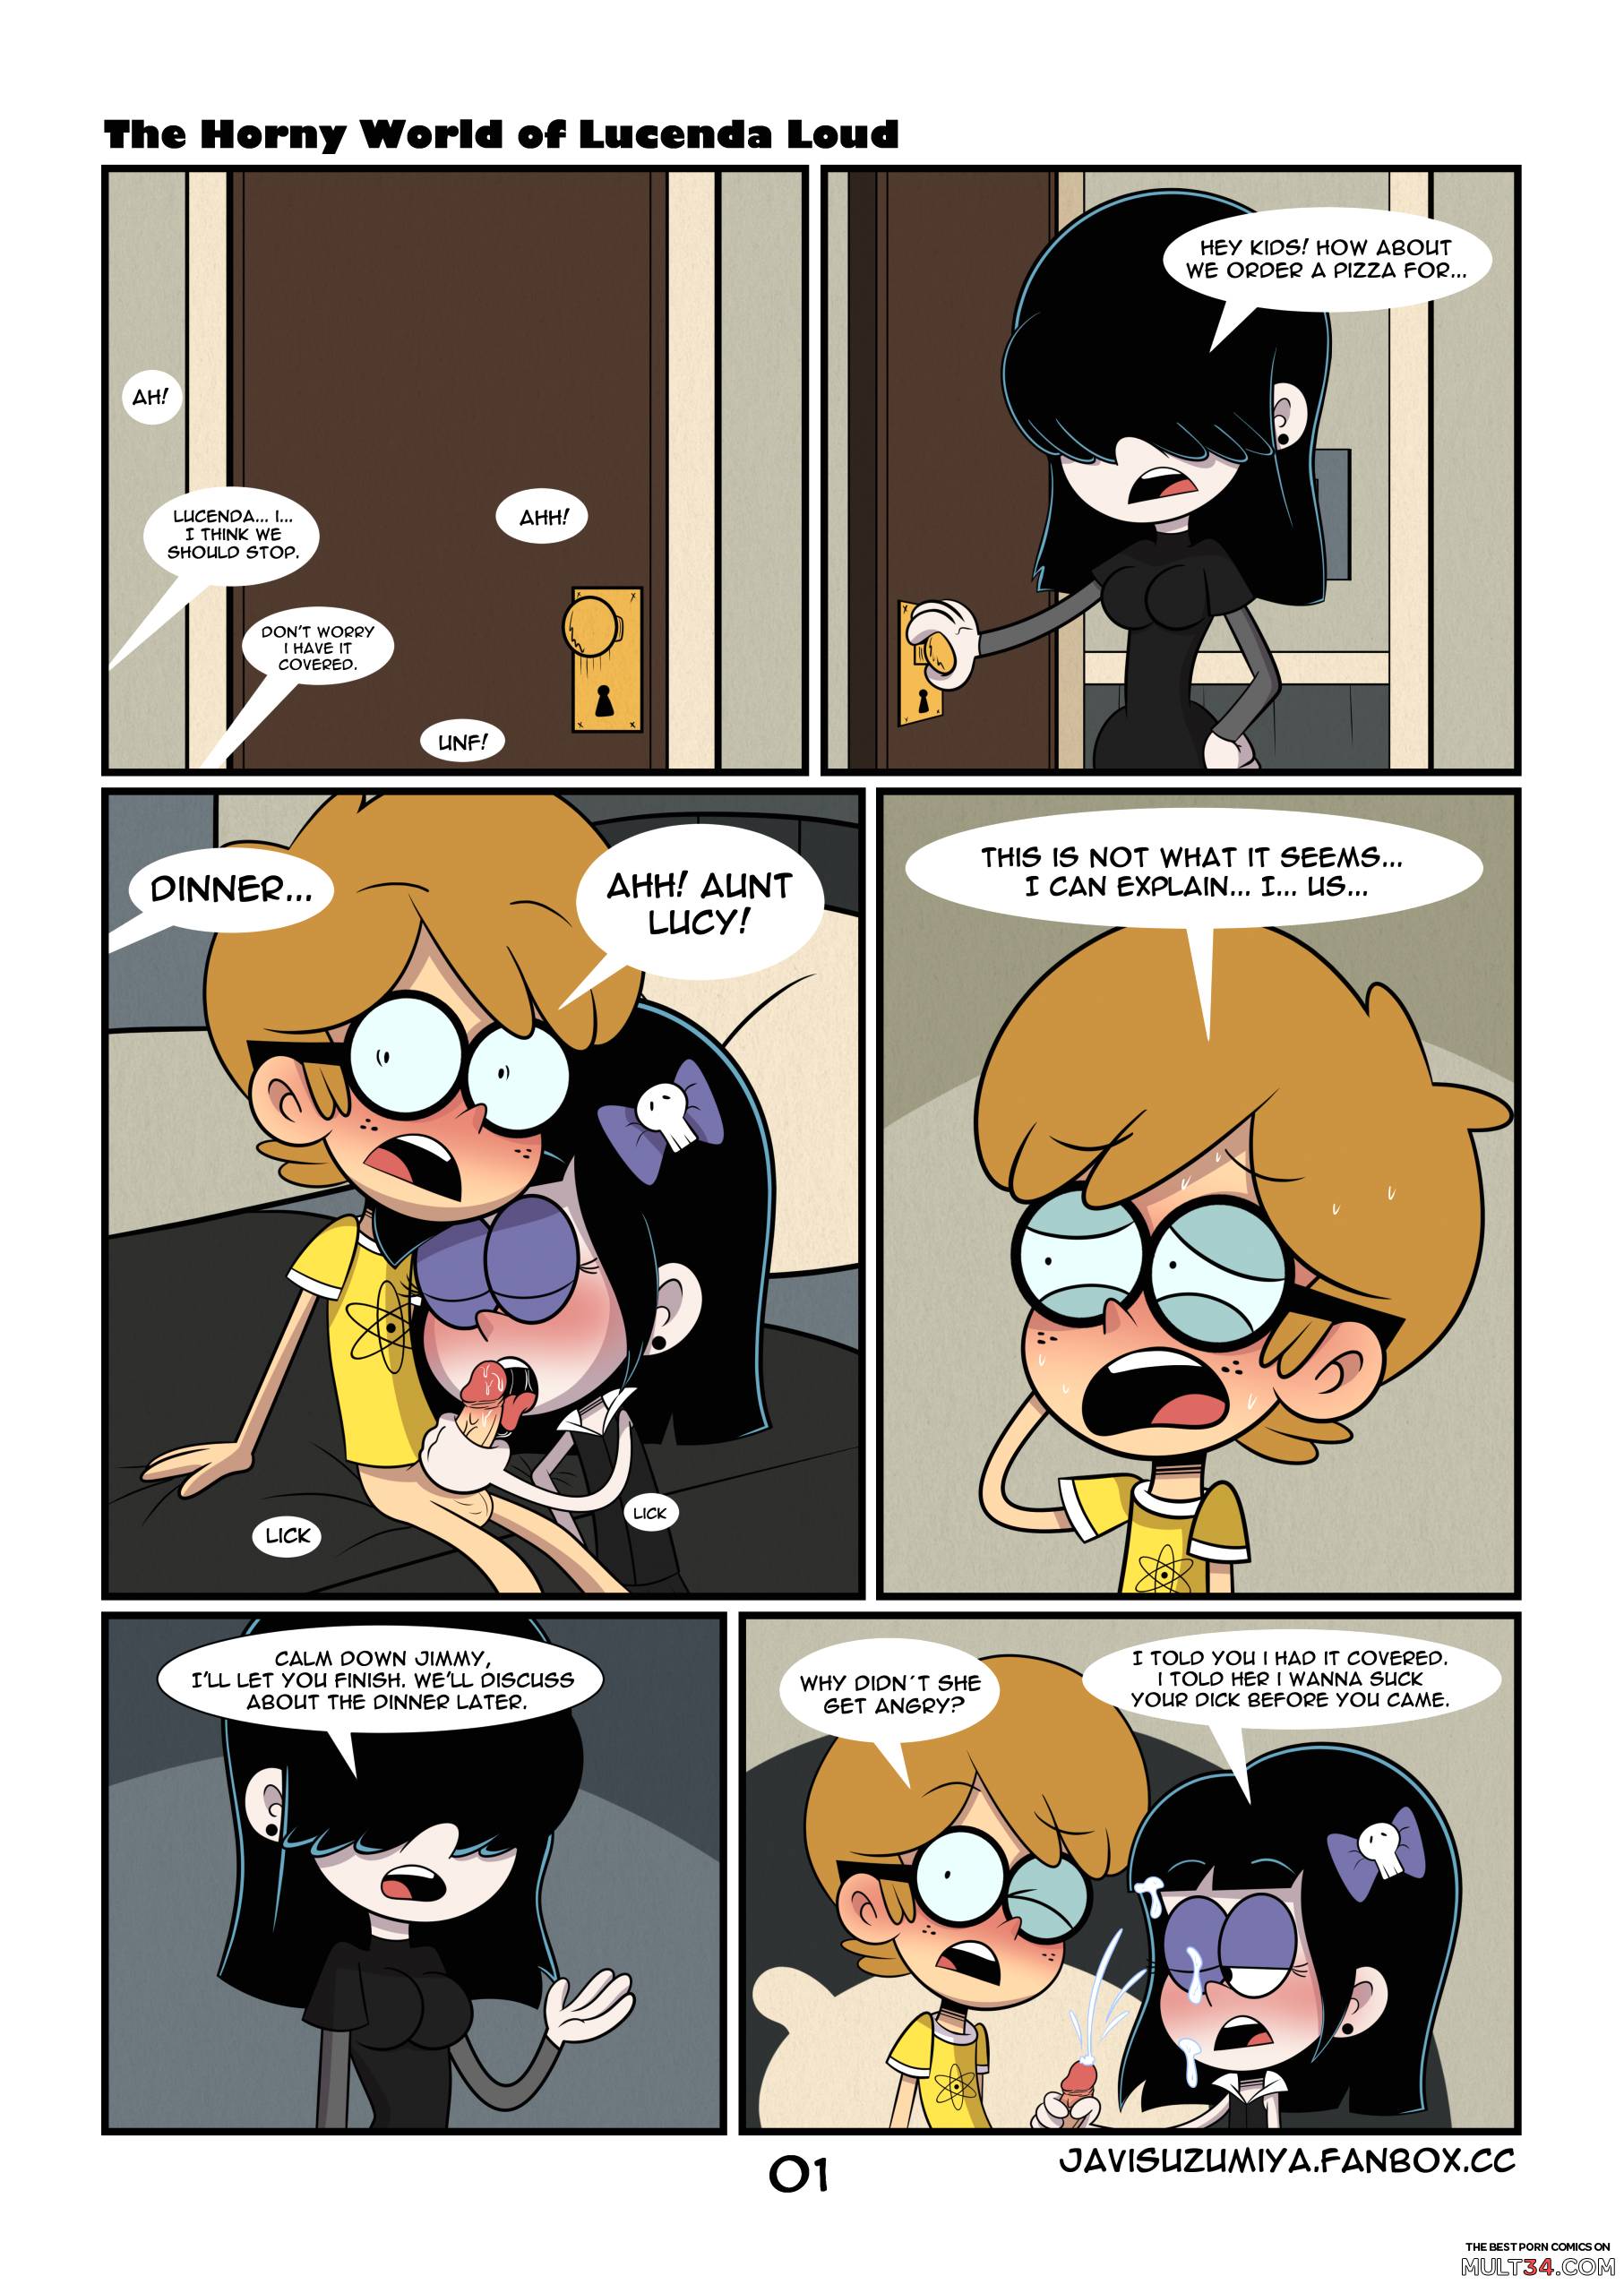 The Horny World of Lucenda Loud page 1